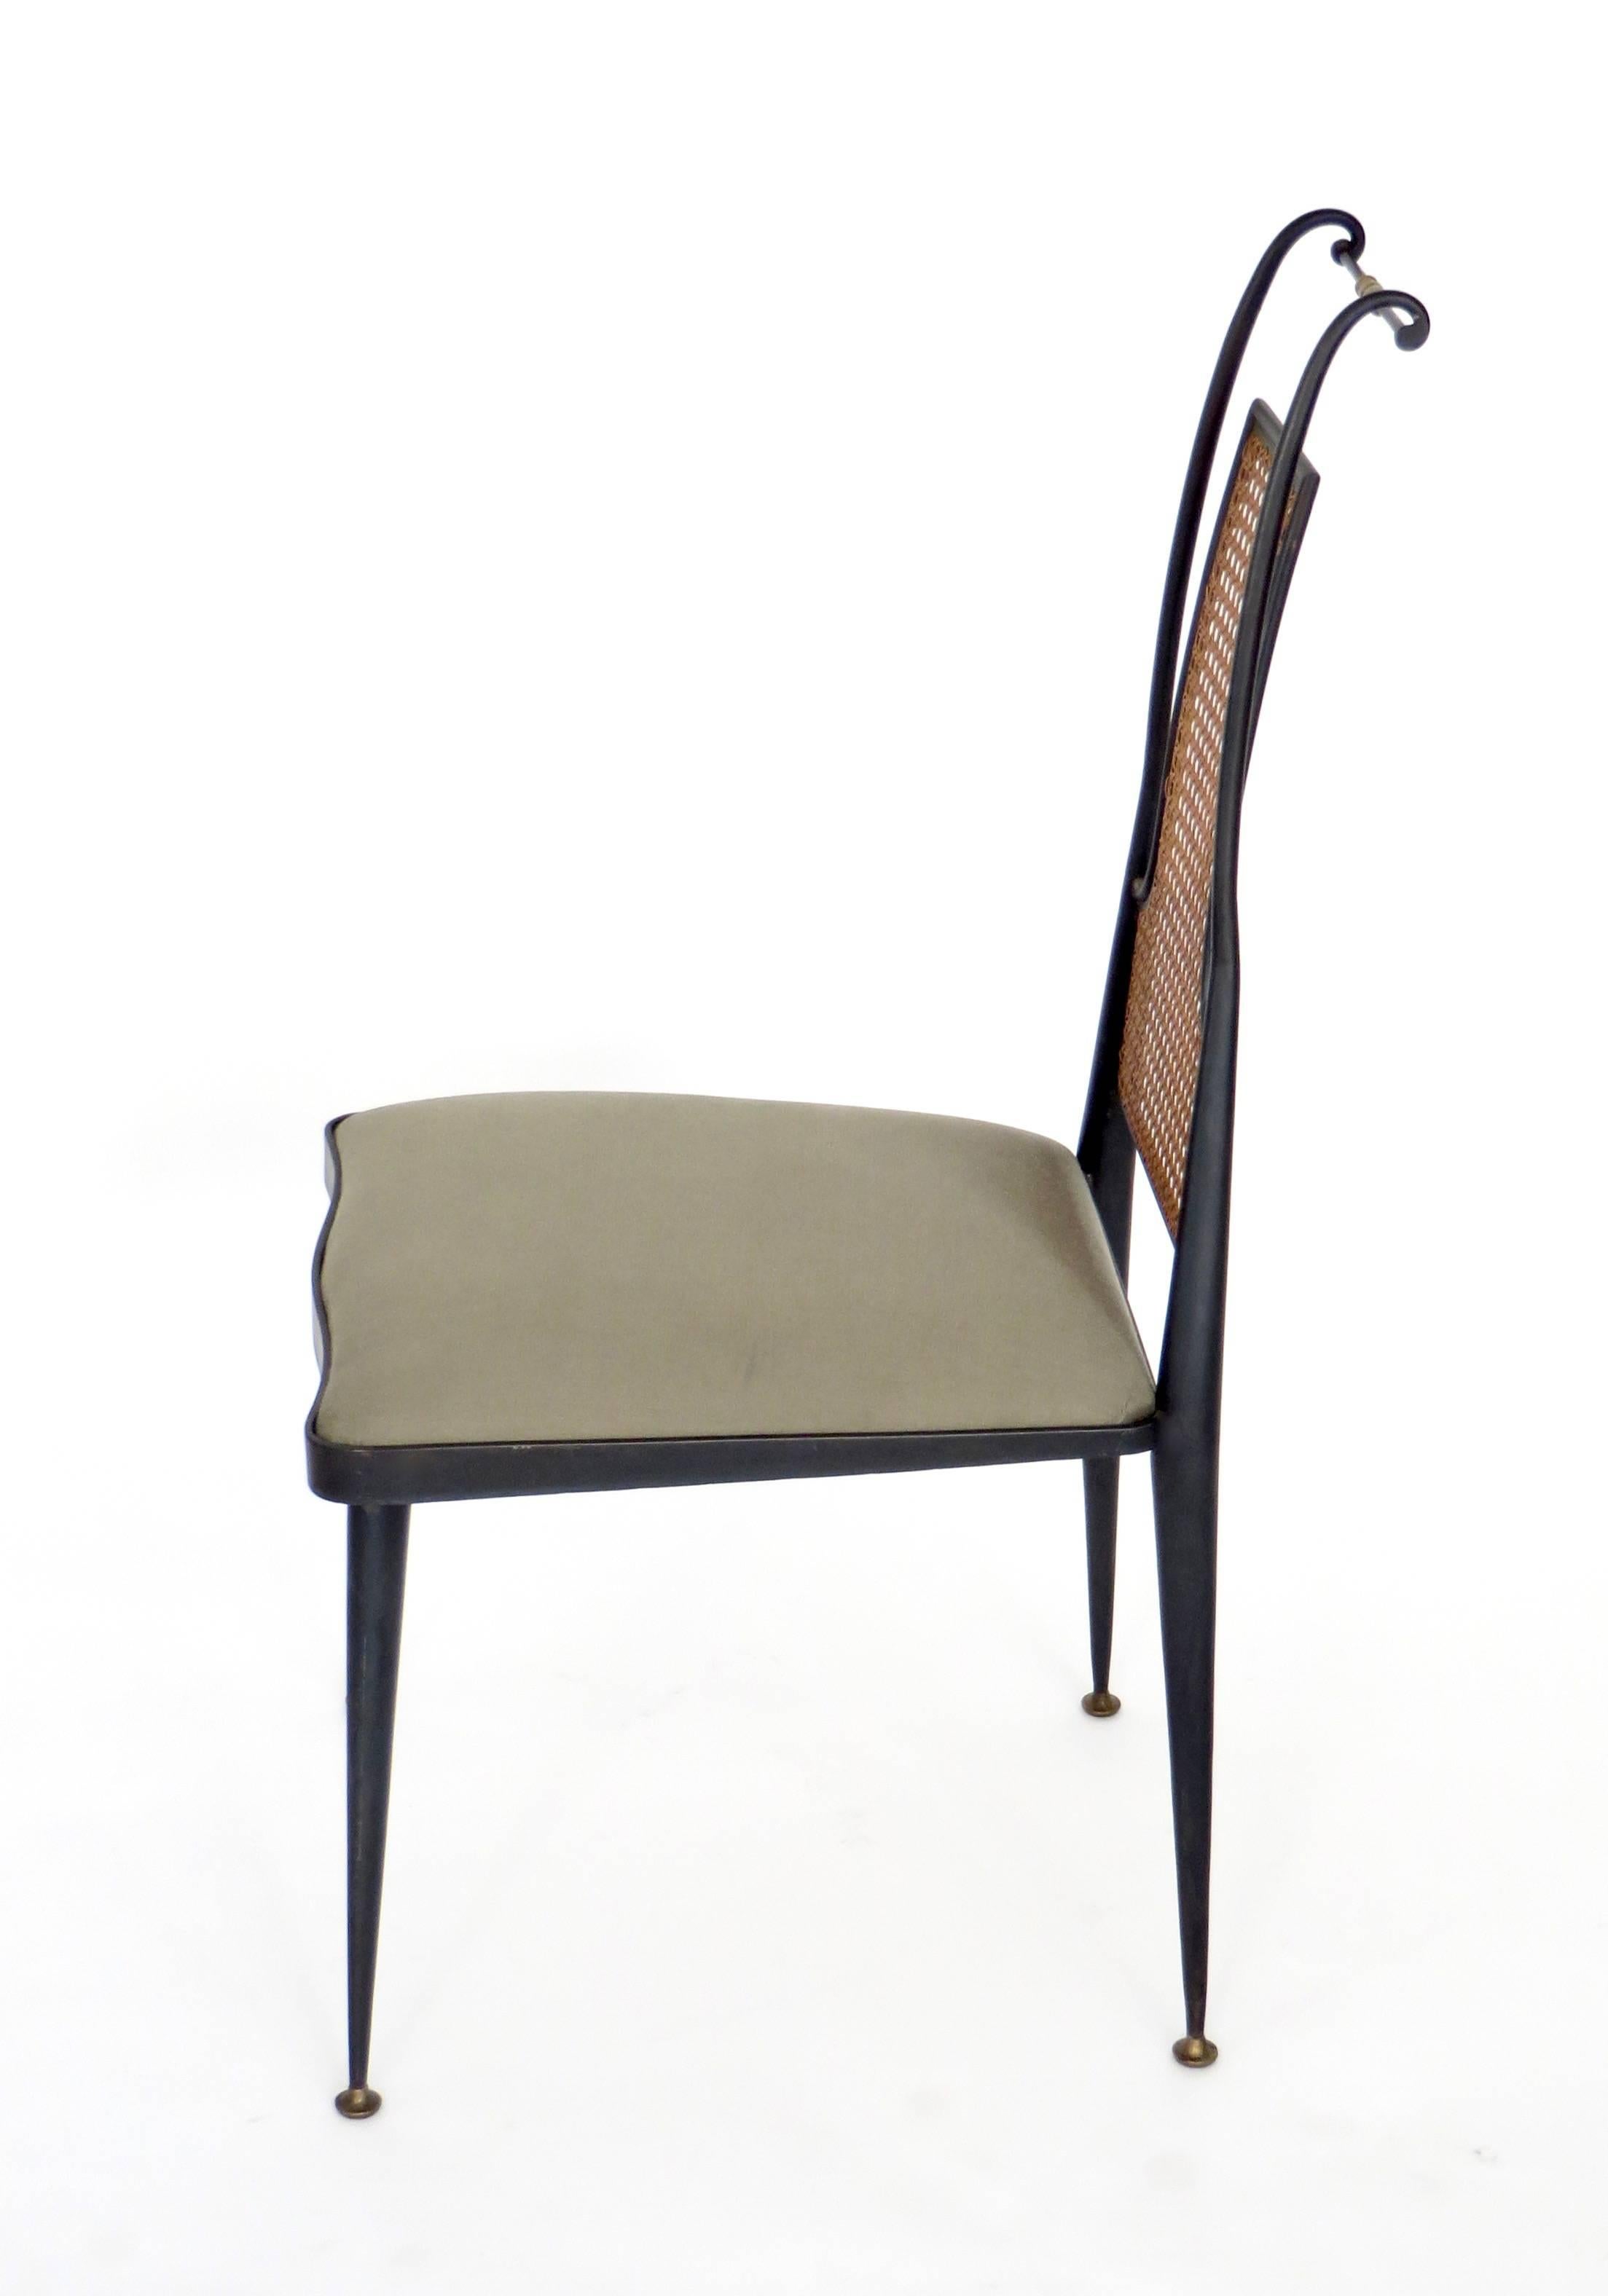 Mexican Pair of Side Chairs by Arturo Pani, circa 1950